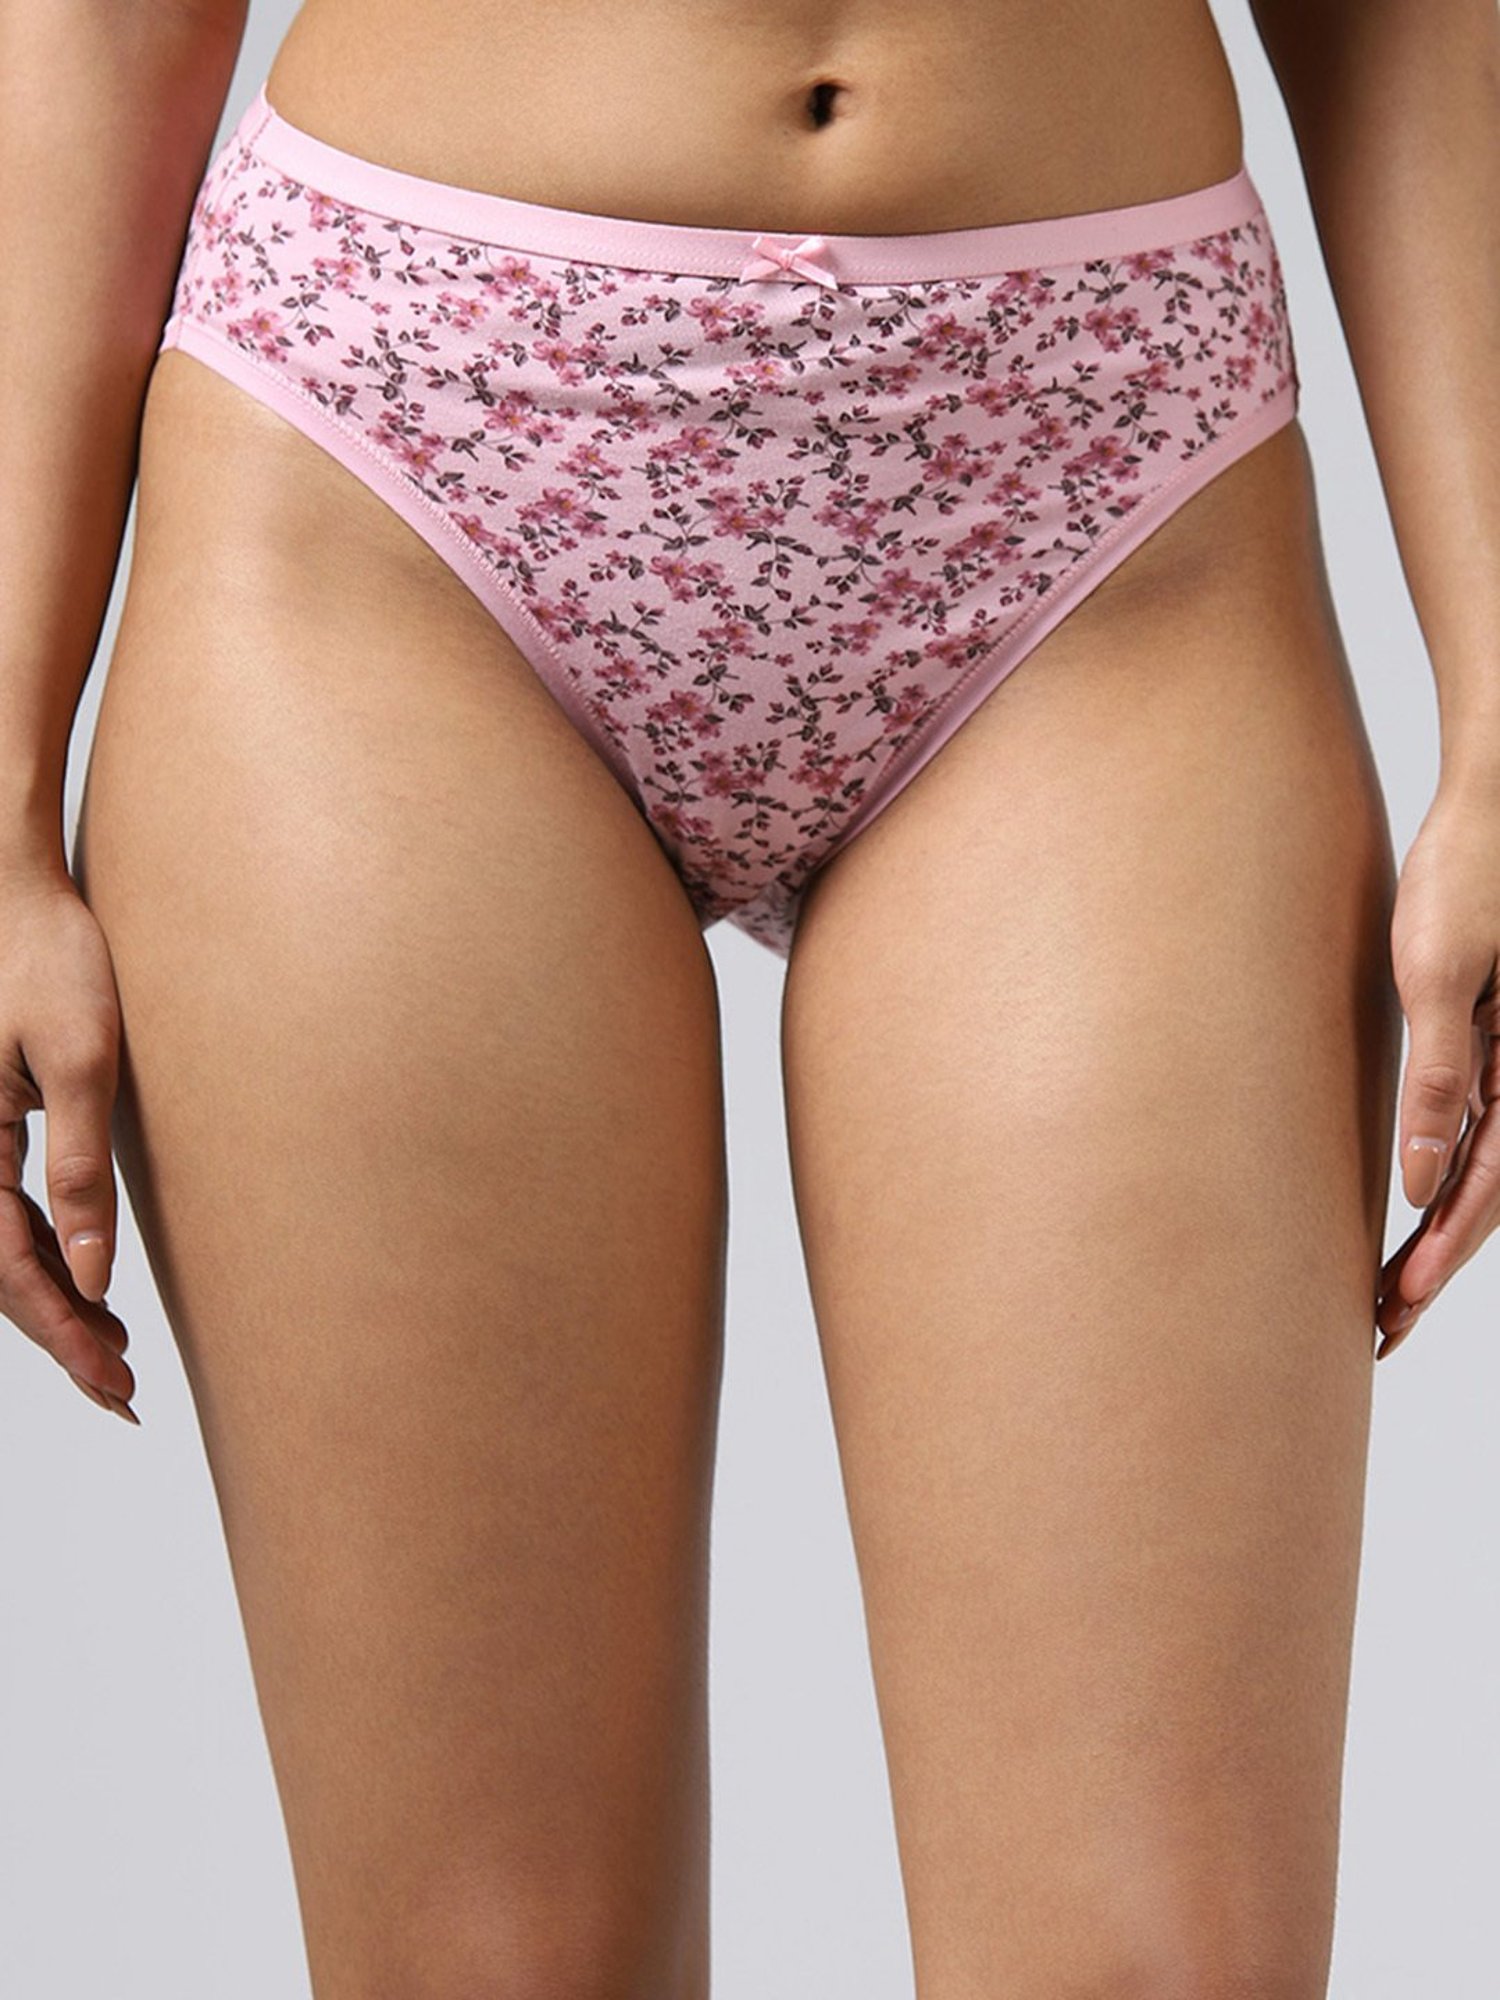 Buy Wunderlove Pink Polka Dotted High Leg Briefs - Pack of 3 from